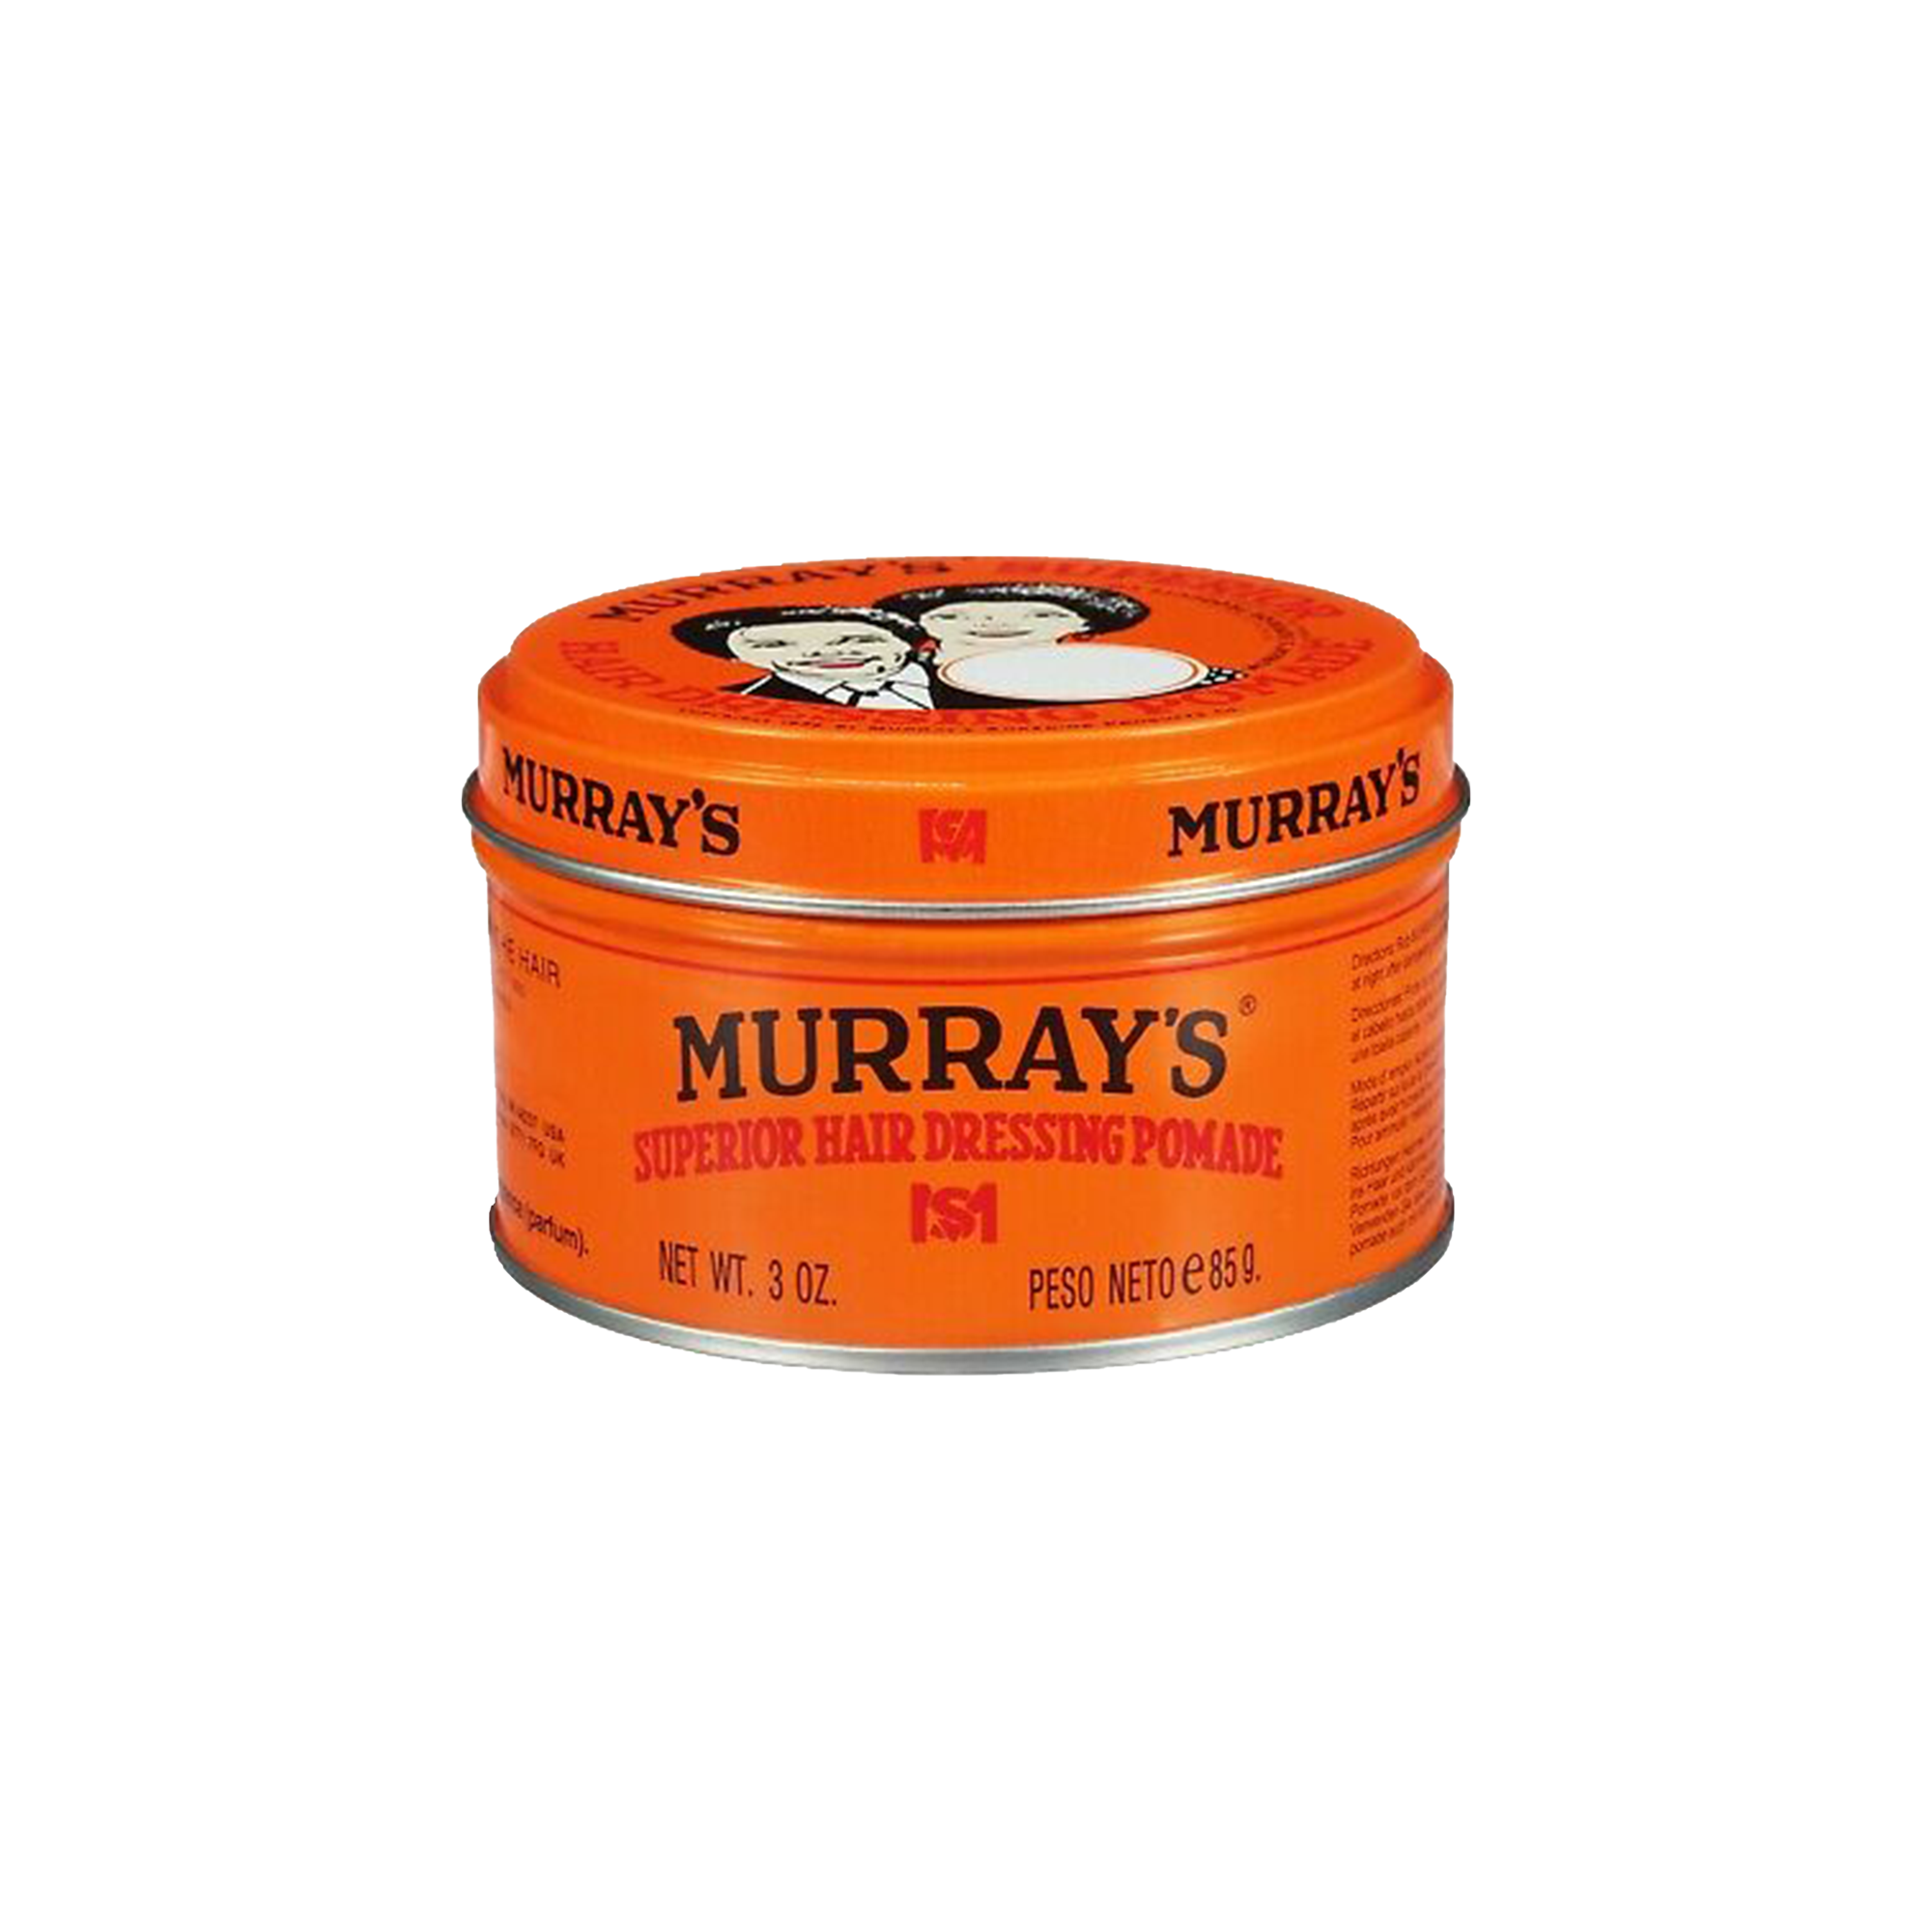 Murray's Superior Hair Dressing Pomade, 3 Ounce (Pack of 4)